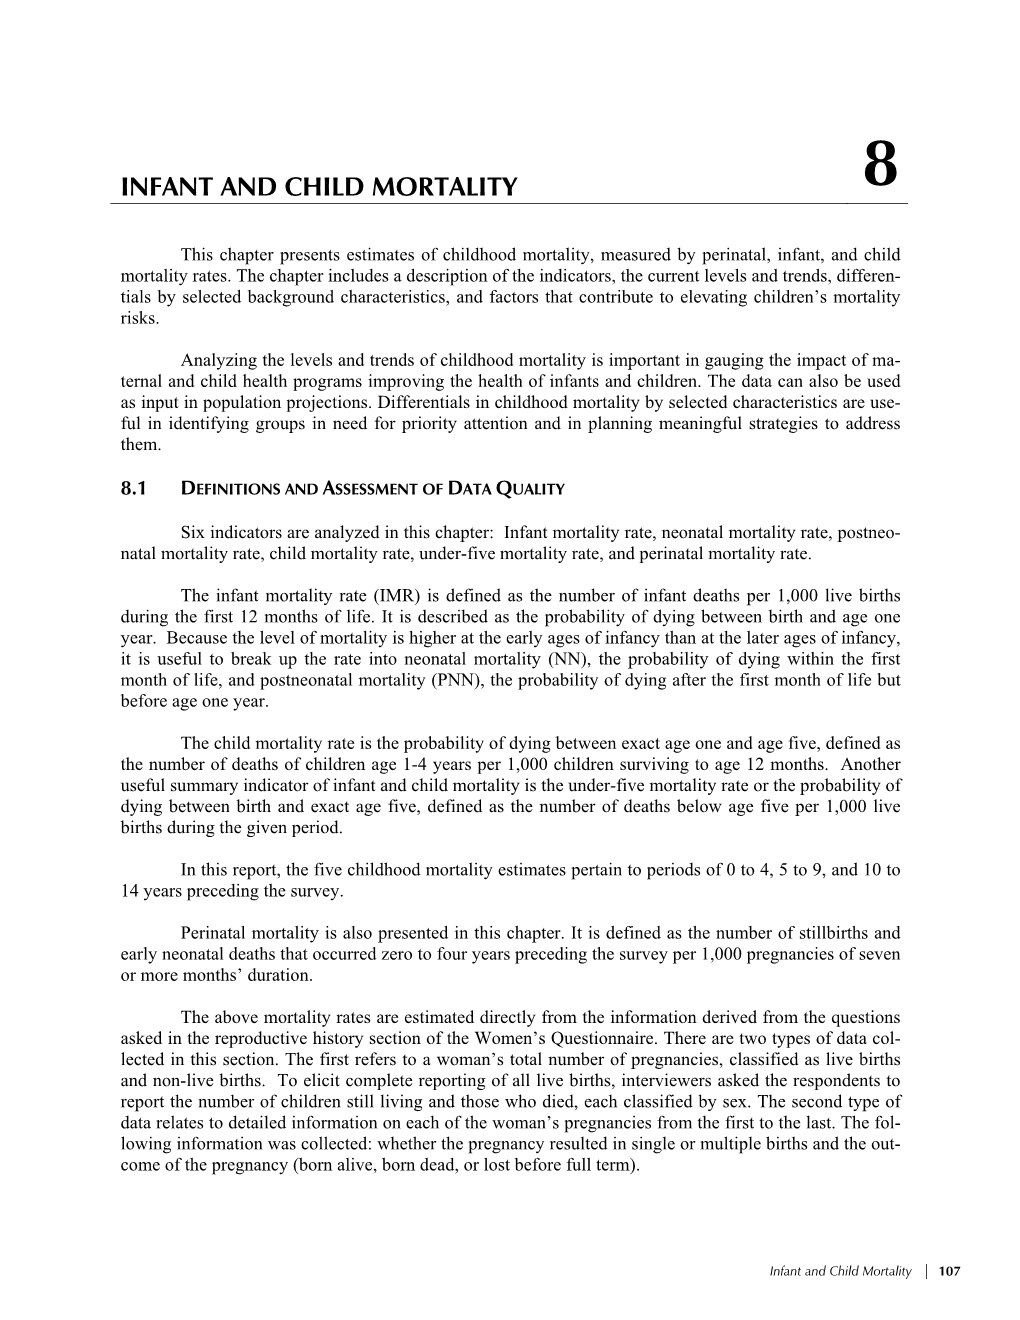 Infant and Child Mortality 8